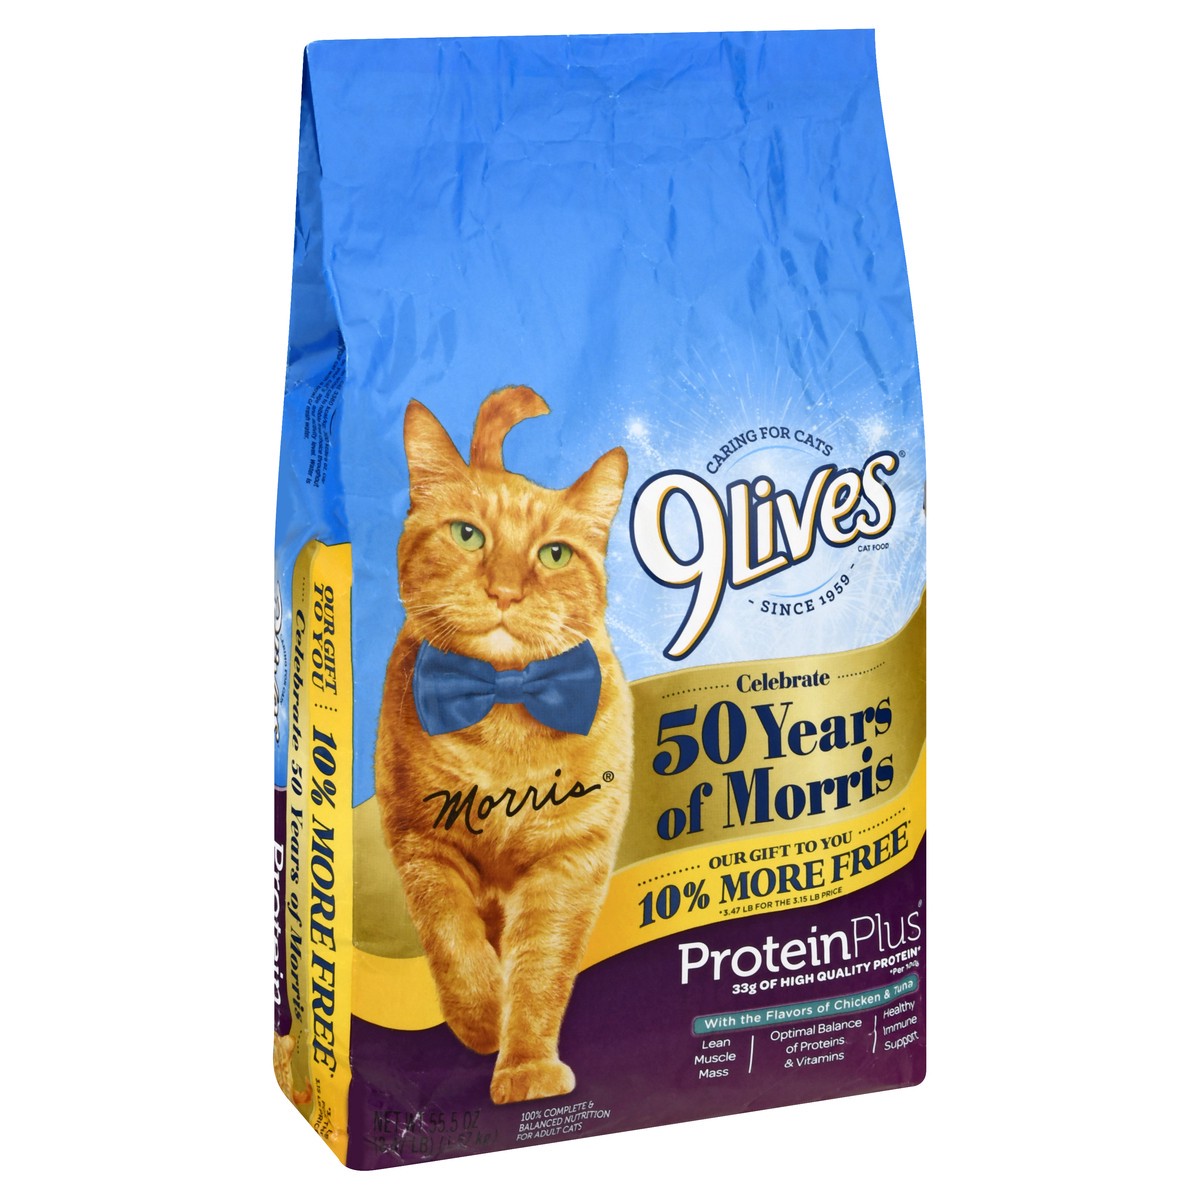 slide 2 of 9, 9Lives Protein Plus Dry Cat Food with Flavors of Chicken & Tuna, 3.47 lb